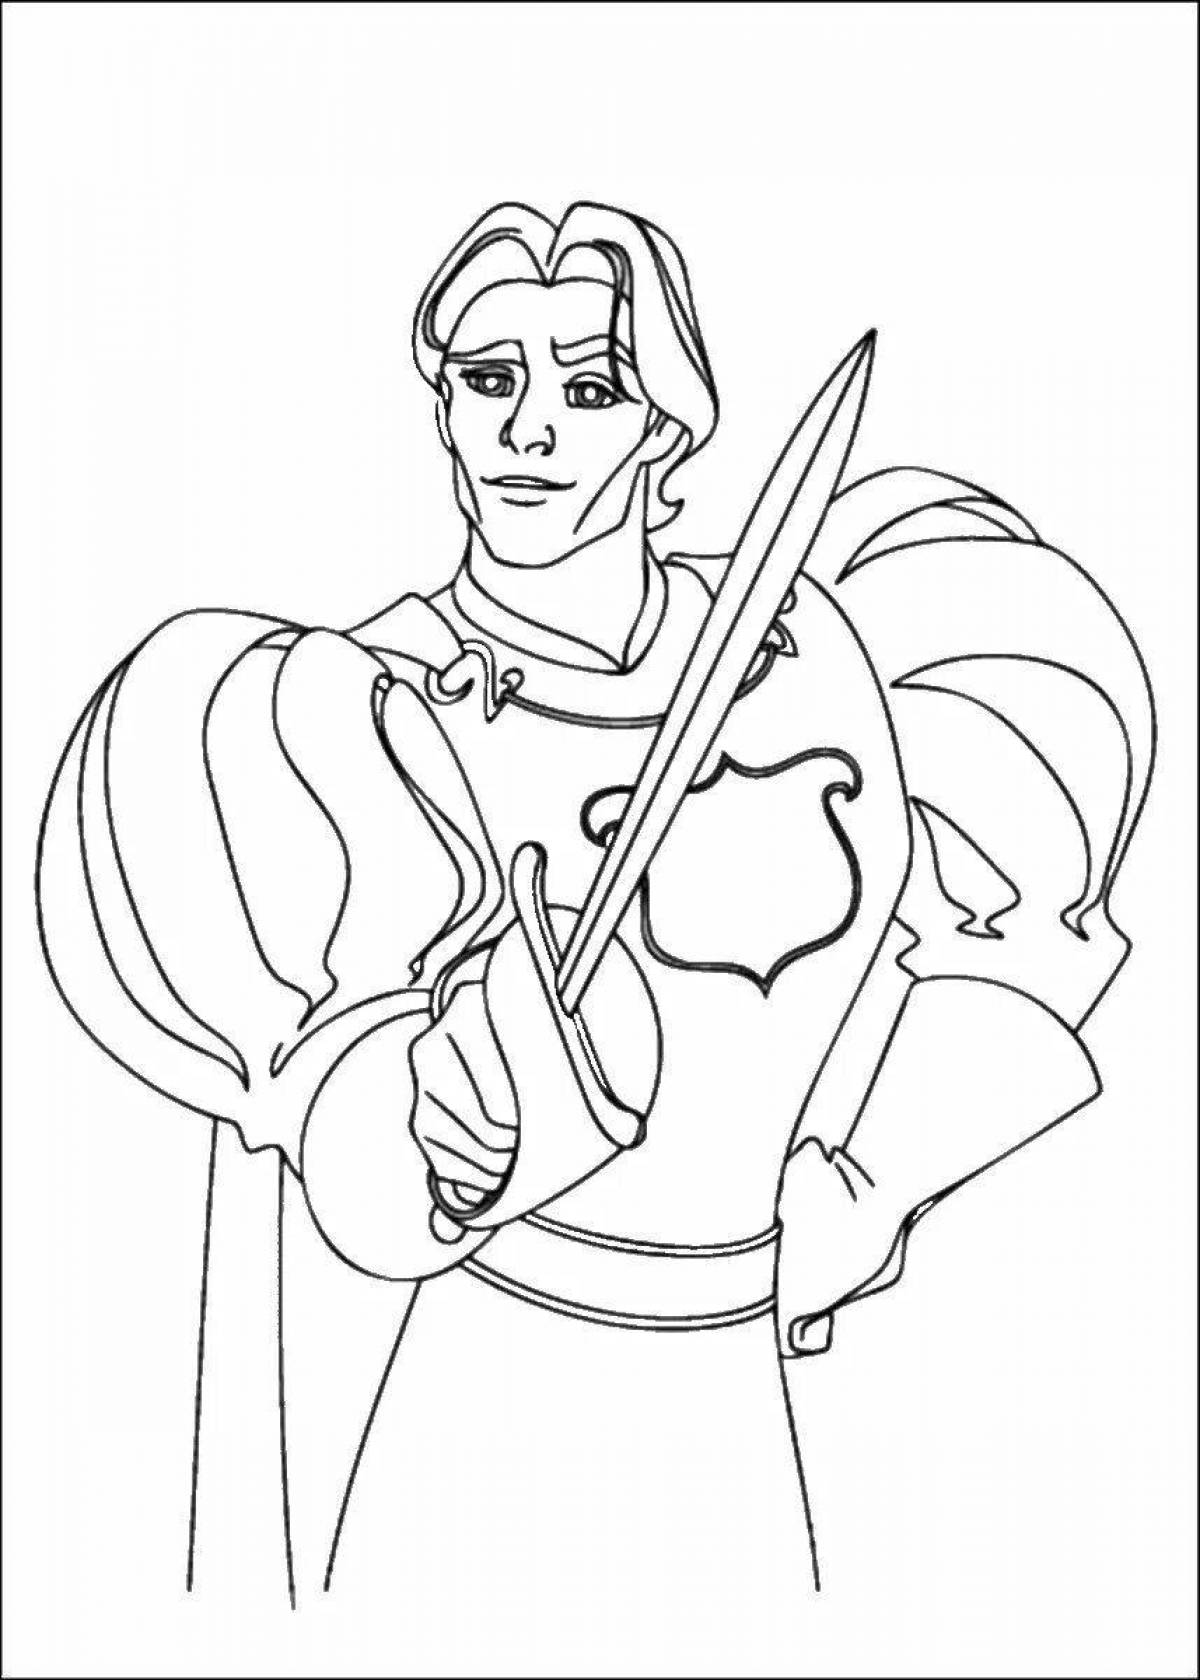 Glorious prince coloring pages for kids